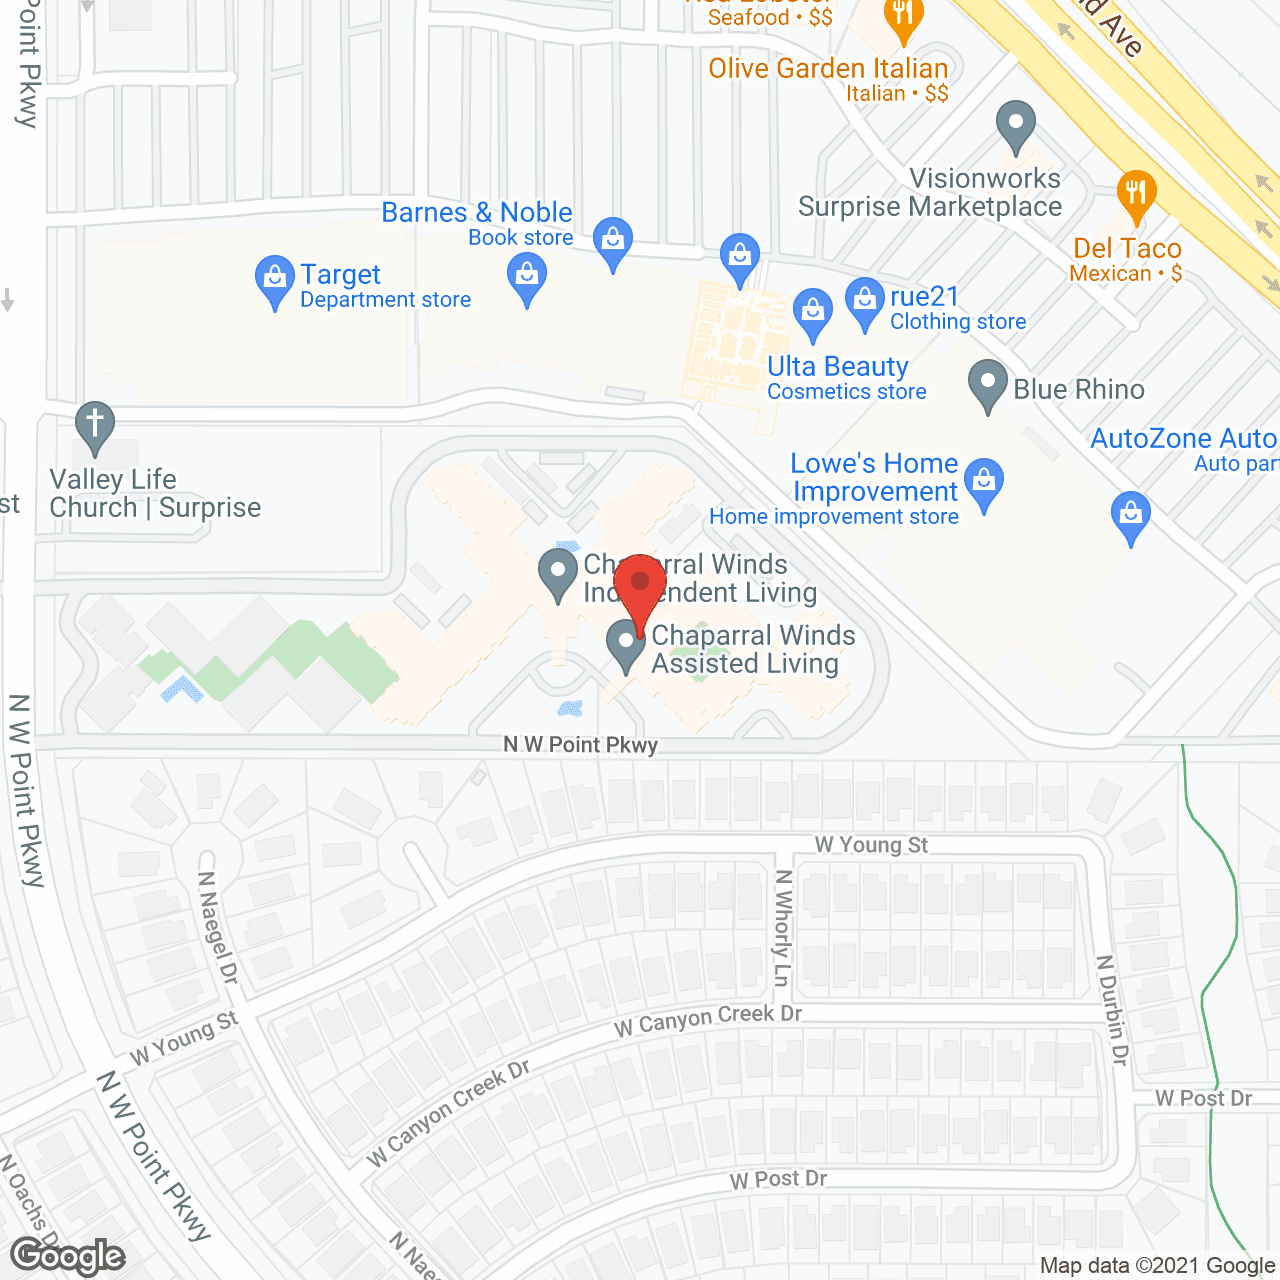 Chaparral Winds Retirement Community in google map